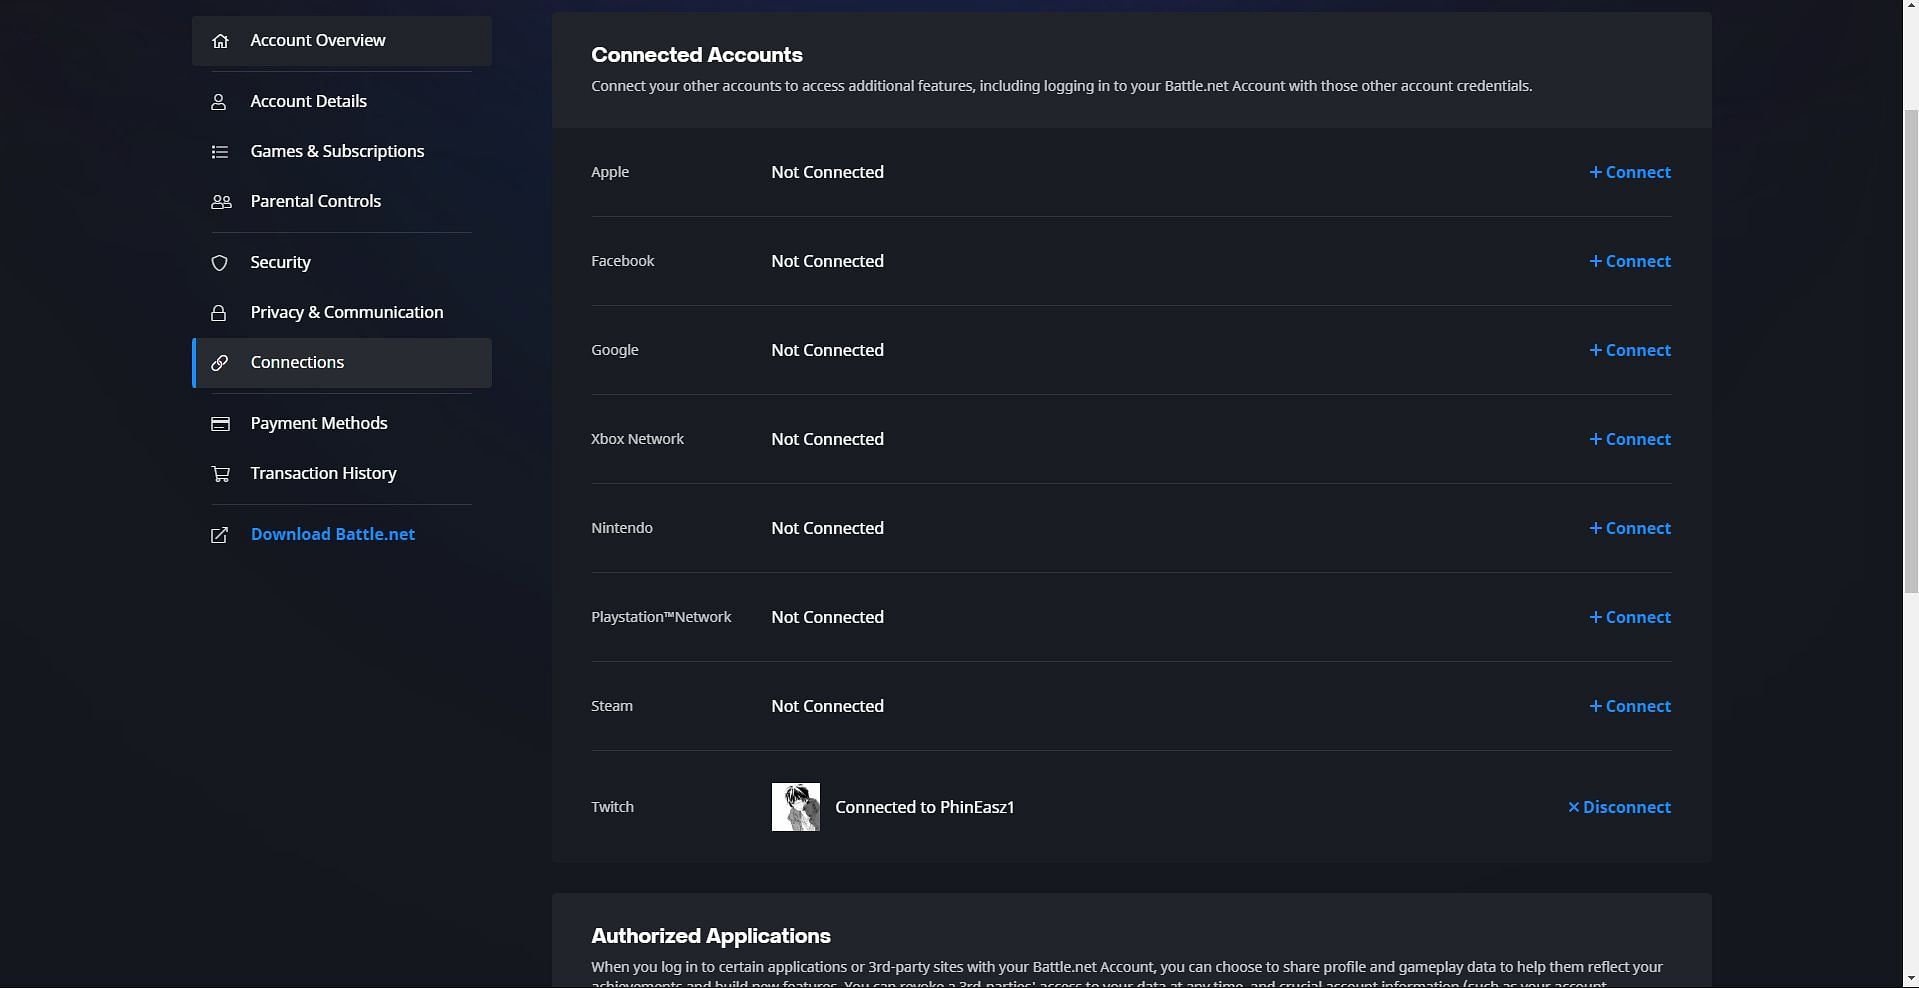 Players can link their console accounts from this section (Image via Blizzard Entertainment)